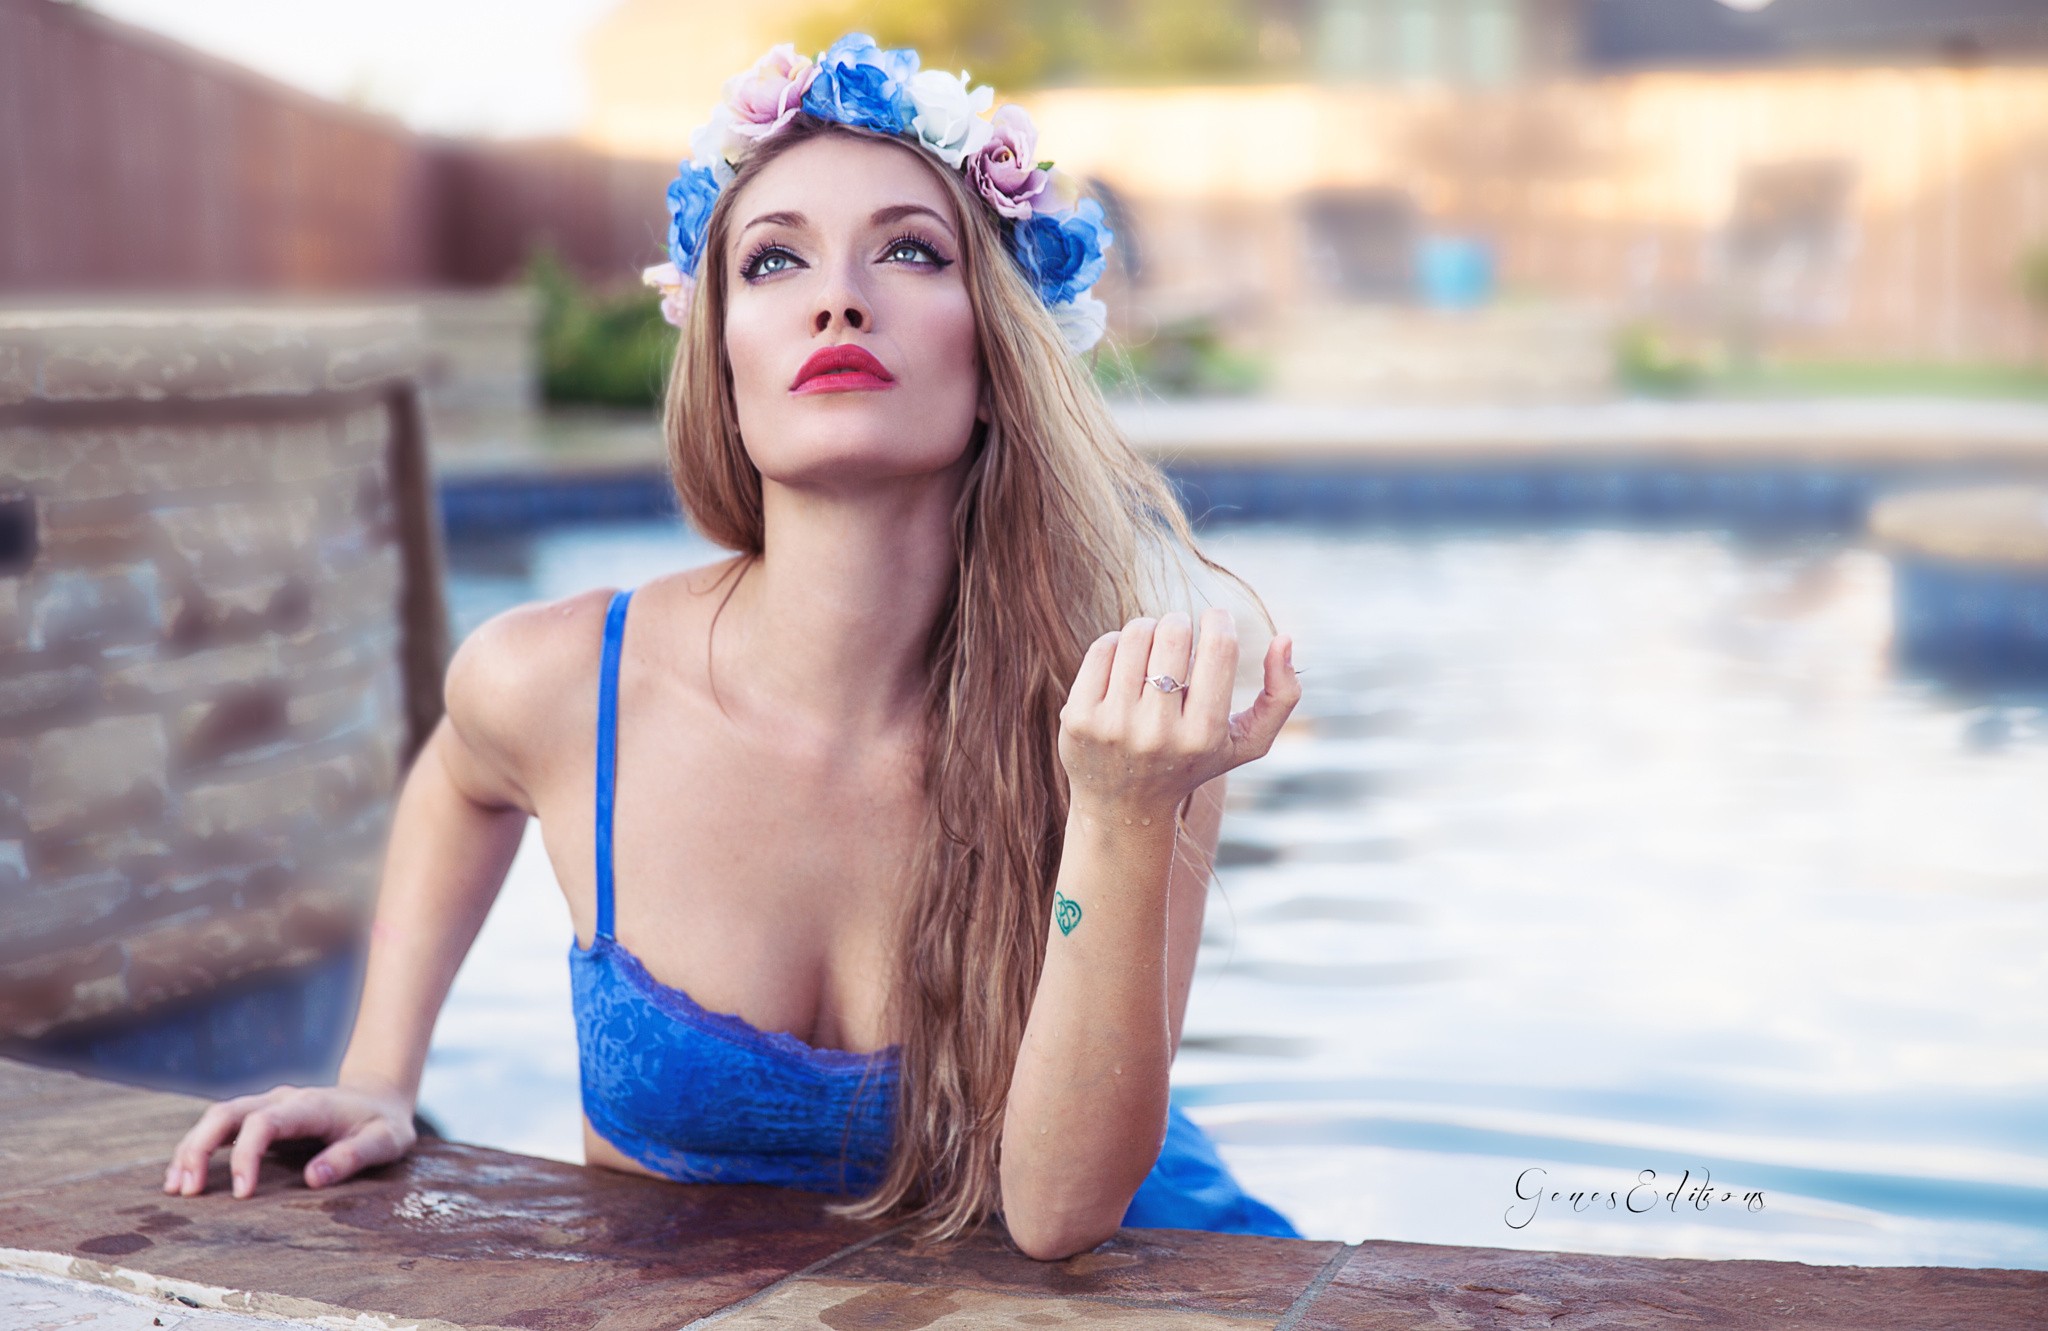 People 2048x1331 women model blonde blue eyes red lipstick cleavage lingerie makeup lipstick flower crown women outdoors outdoors looking up inked girls heart (tattoo)